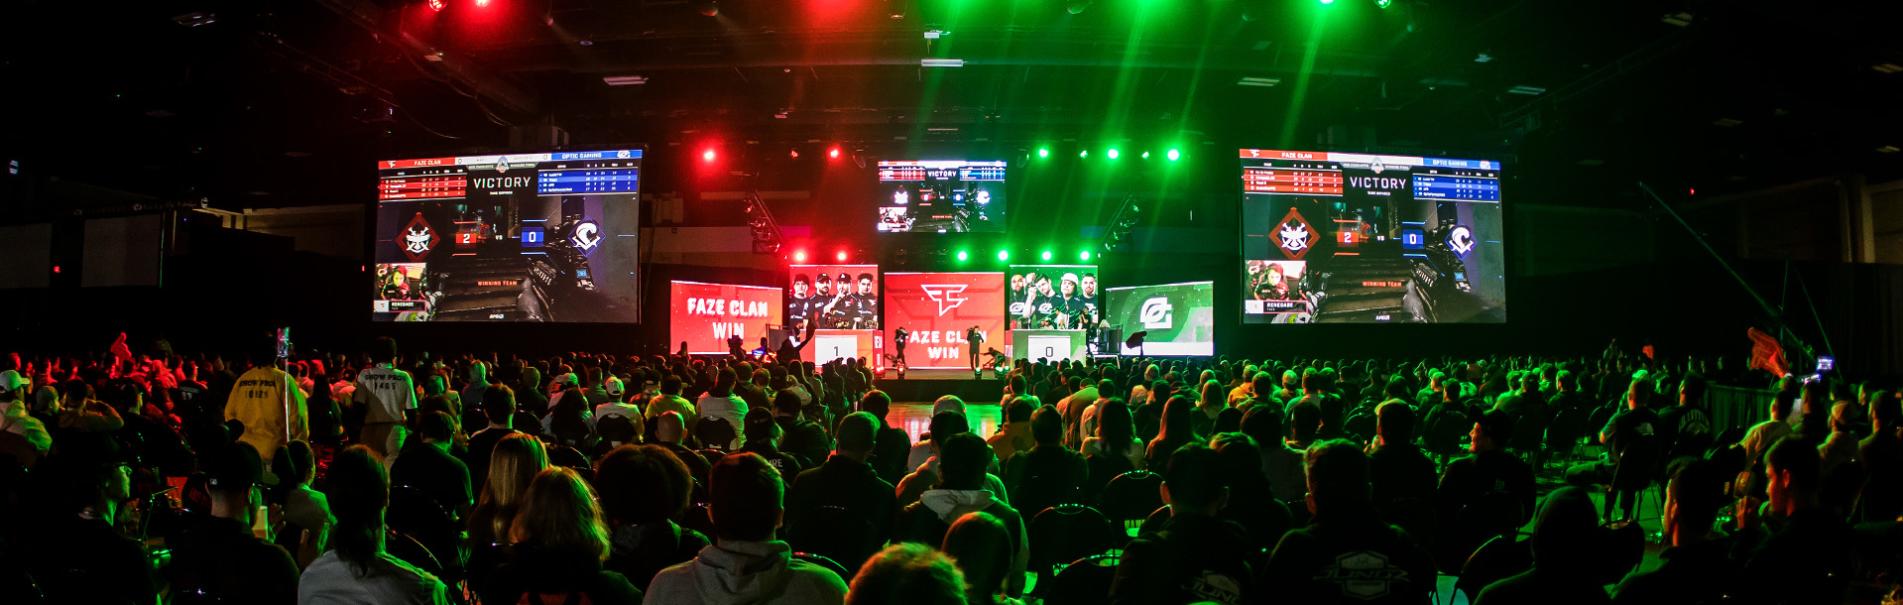 Halo Championship Series Will Officially Have No Crowds